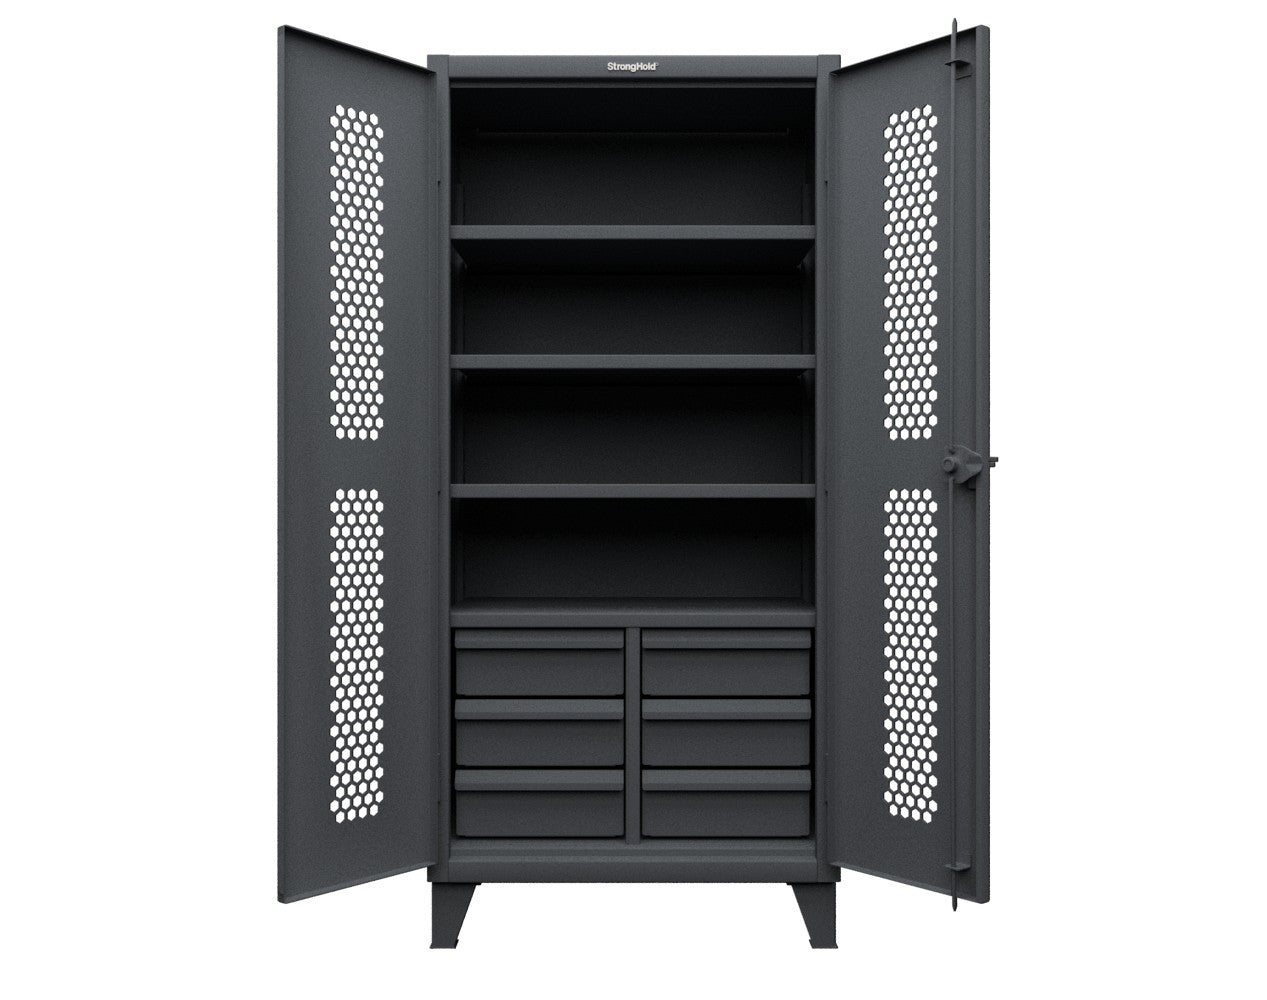 Extreme Duty 12 GA Ventilated (Hex) Cabinet with 6 Half-Width Drawers, 4 Shelves - 36 In. W x 24 In. D x 78 In. H